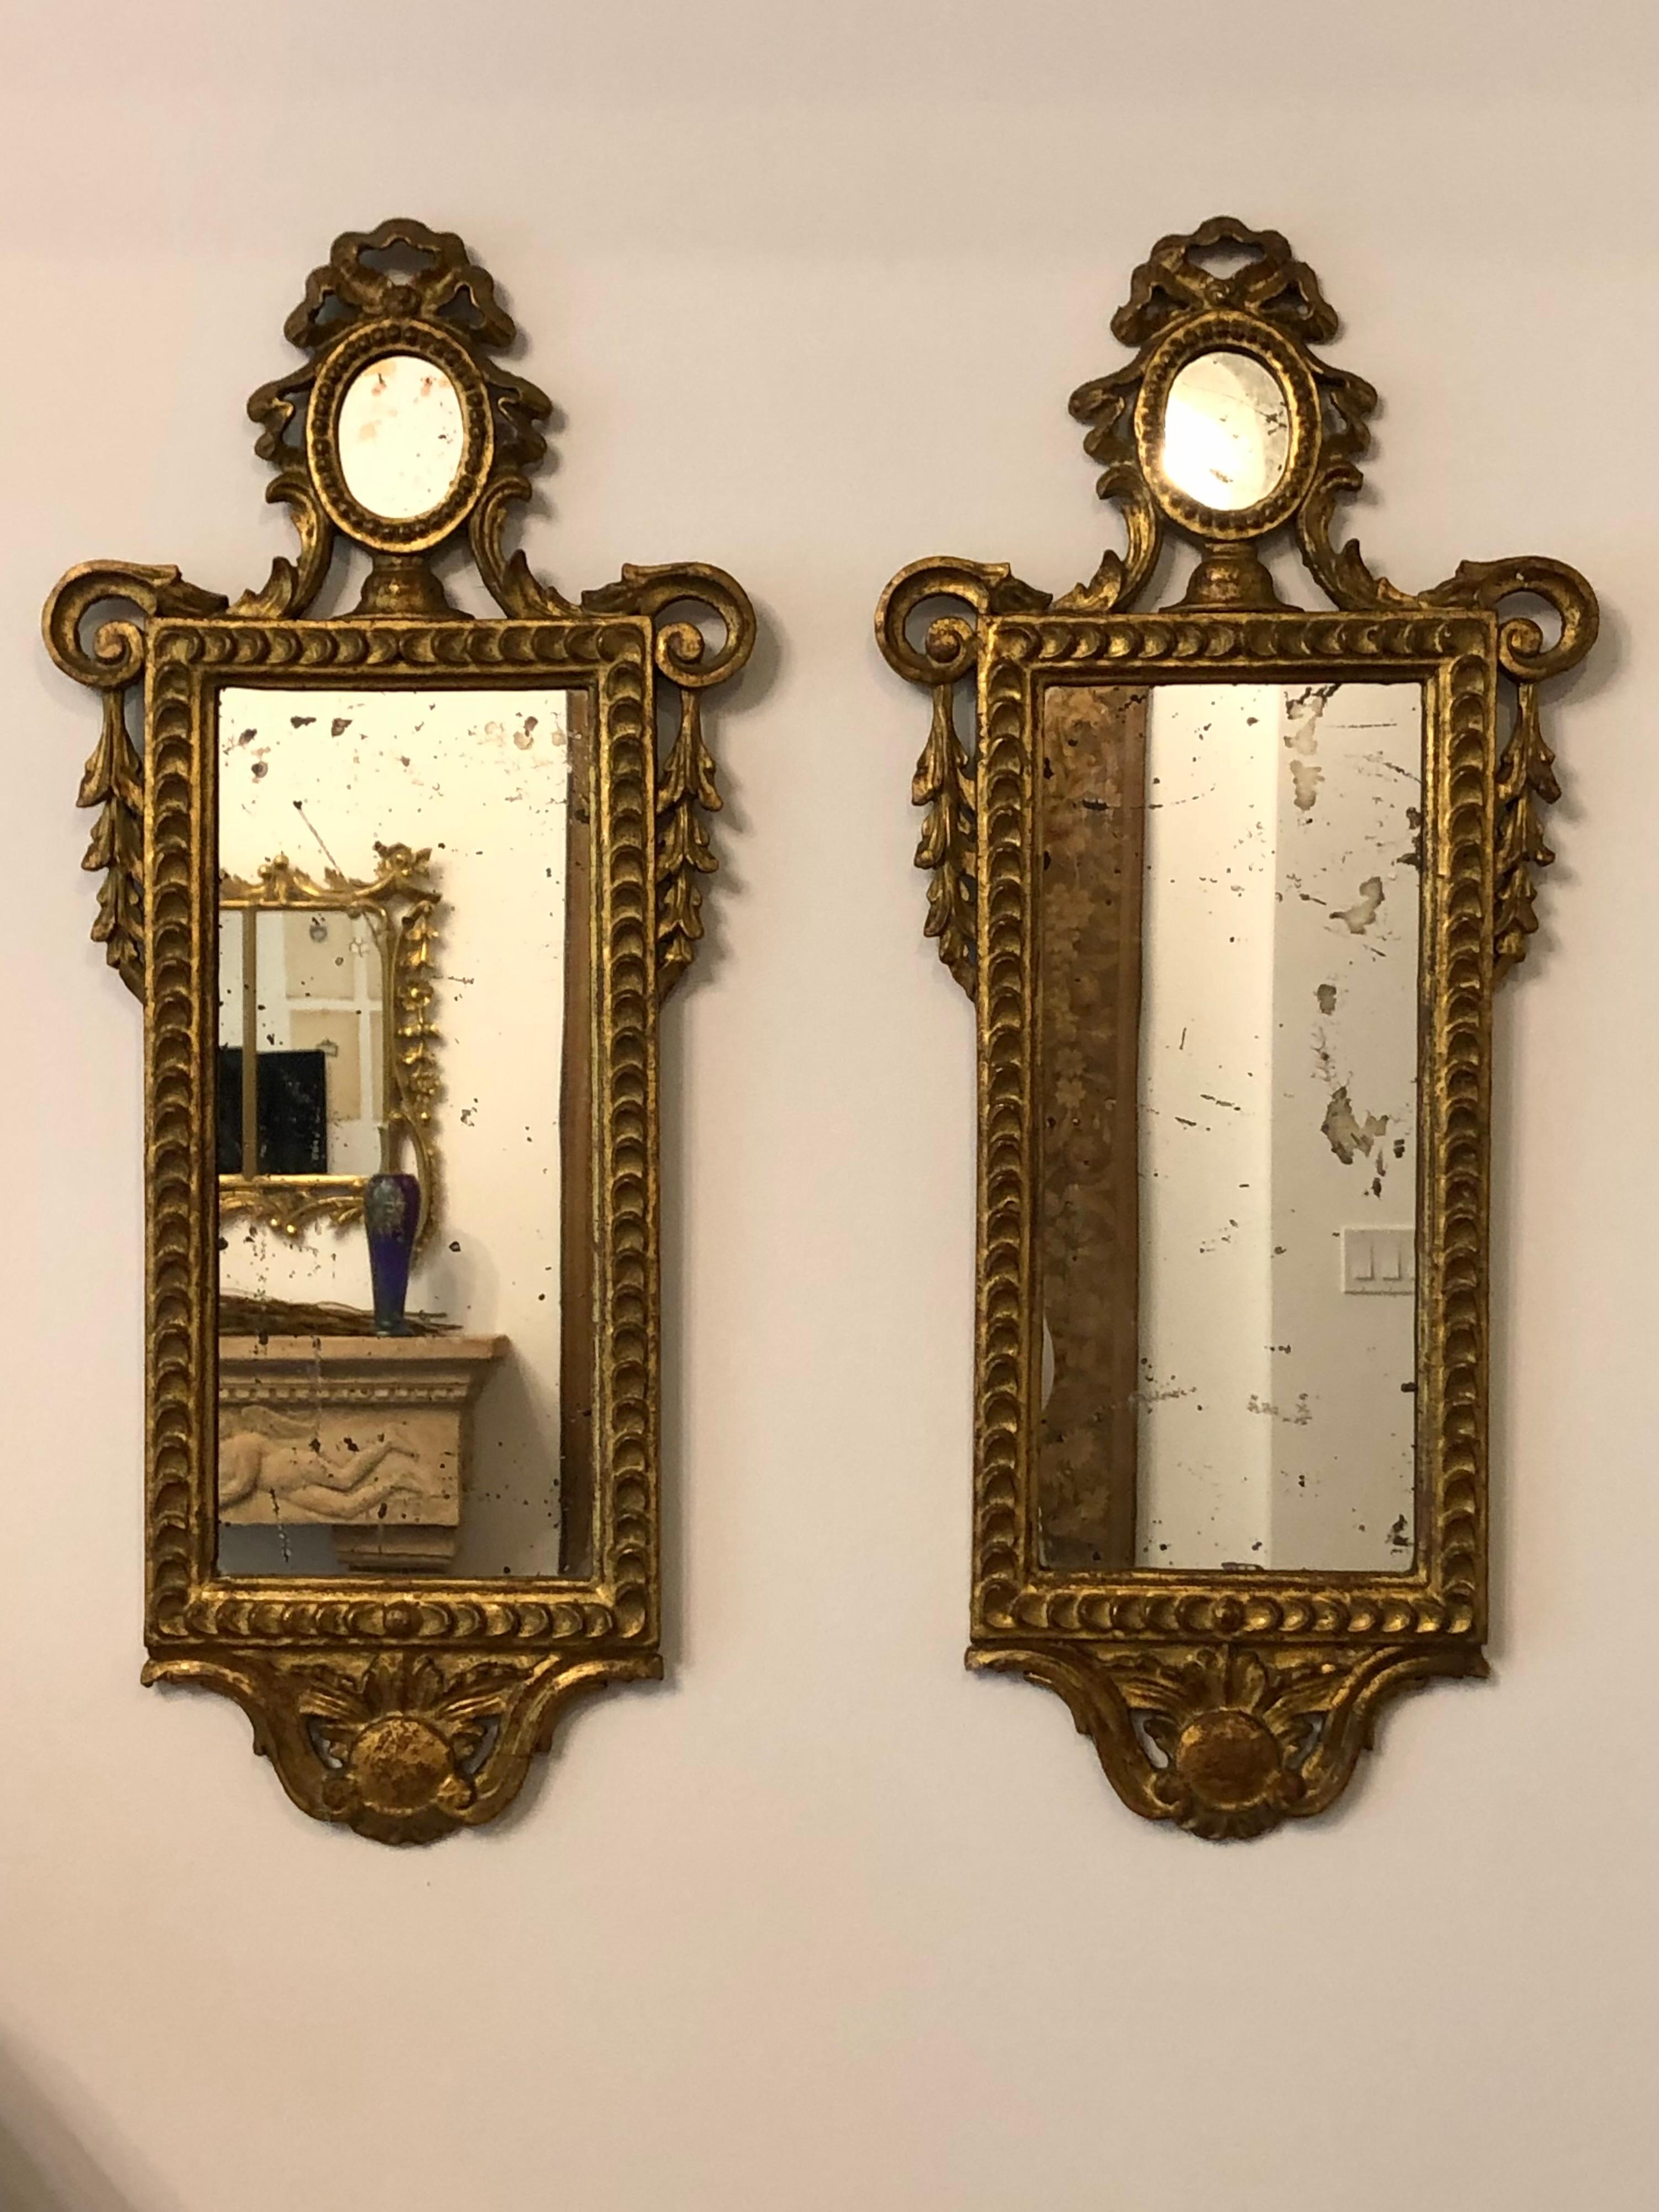 This is a lovely pair of petite Neoclassical mirrors. Rectangular mirrors surmounted by oval rosettes with ribbons, swags and beading. Beautiful oxidation to the glass. Most probably French.
These mirrors are in good condition with some instability